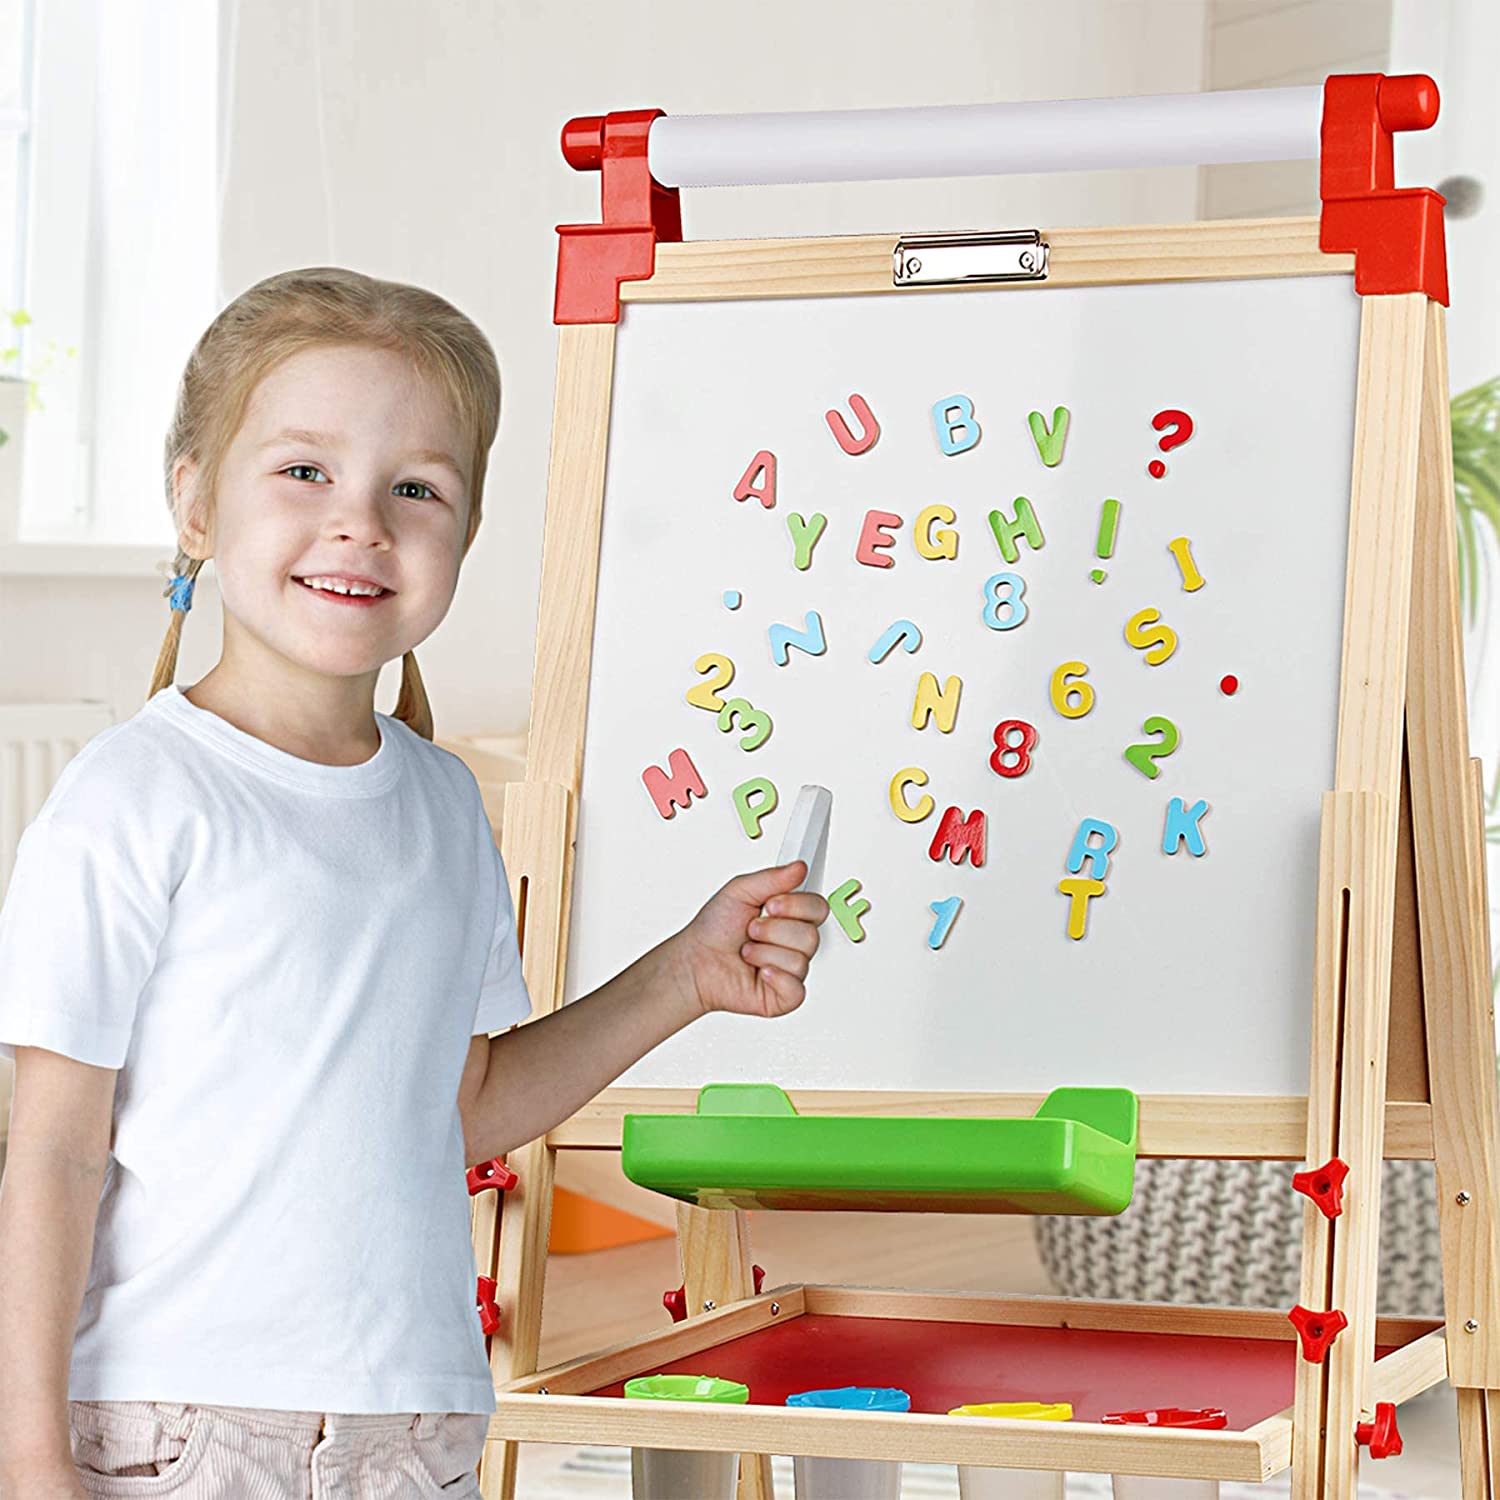 Joyooss Wooden Kid Easel with Paper Roll, Double Sided Magnetic Chalkboard and Whiteboard, Children Art Easel Adjustable Height 37-50inch, Drawing ea